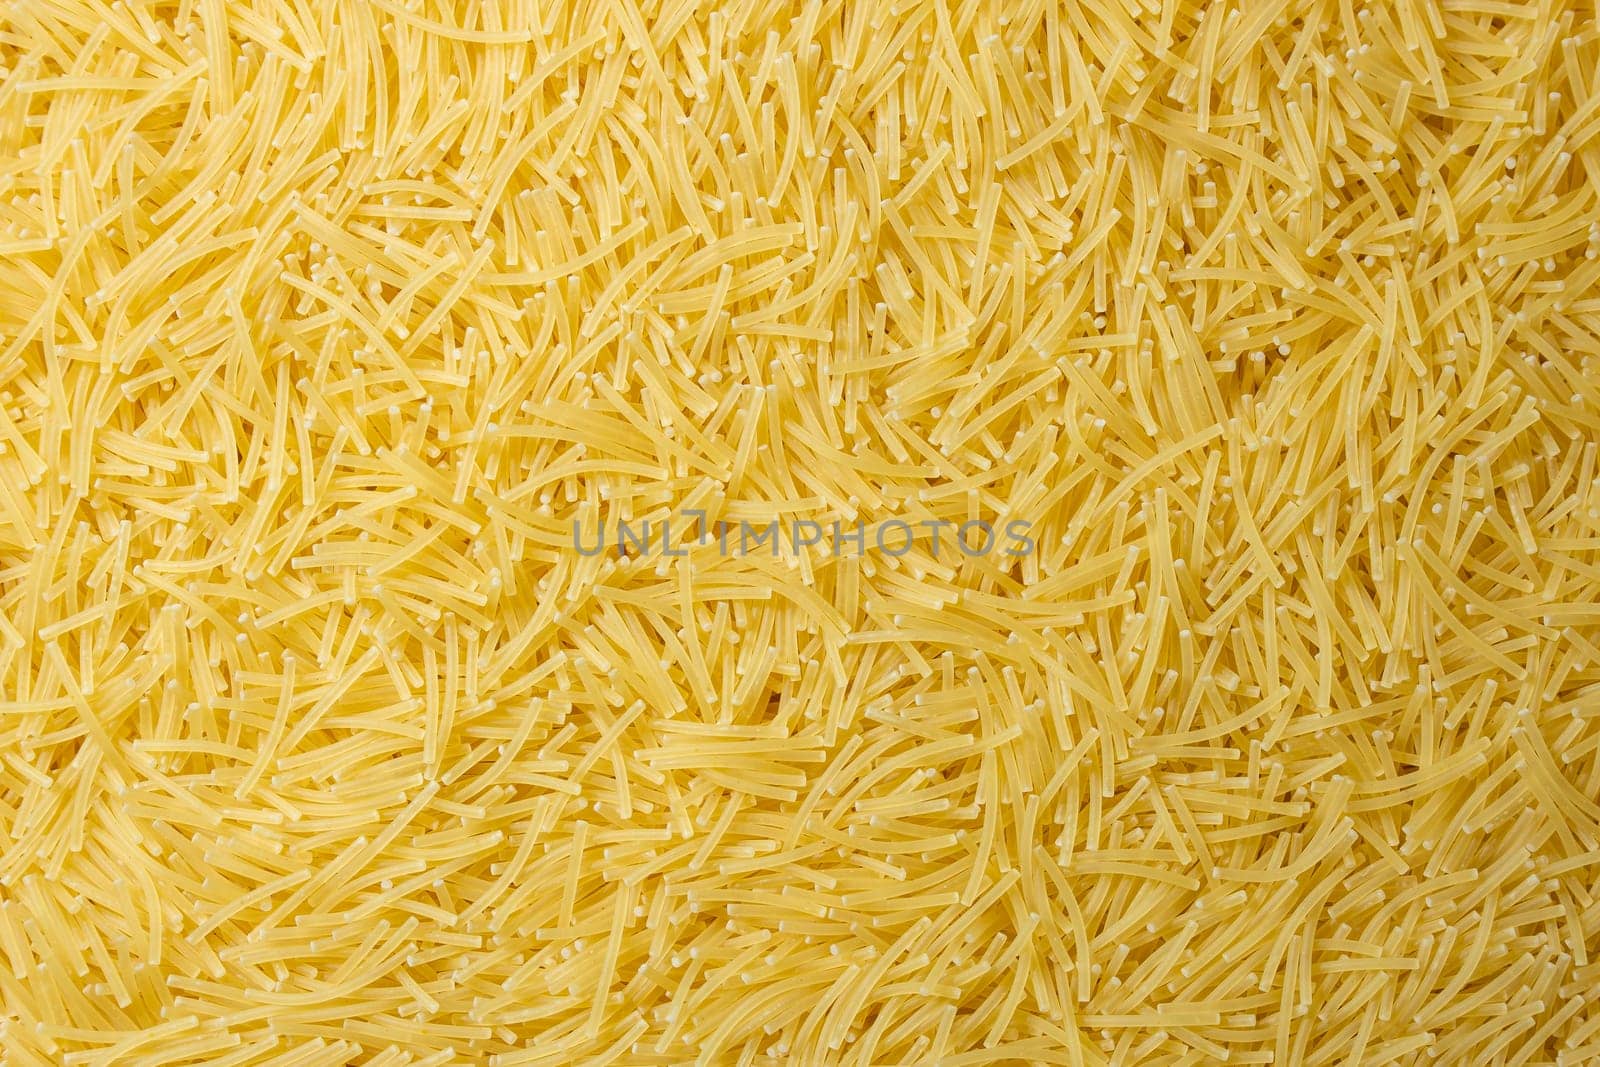 Uncooked Filini Pasta: A Culinary Canvas of Noodles, Creating a Lively and Textured Background for Gourmet Cooking. Dry Pasta. Raw Macaroni - Top View, Flat Lay